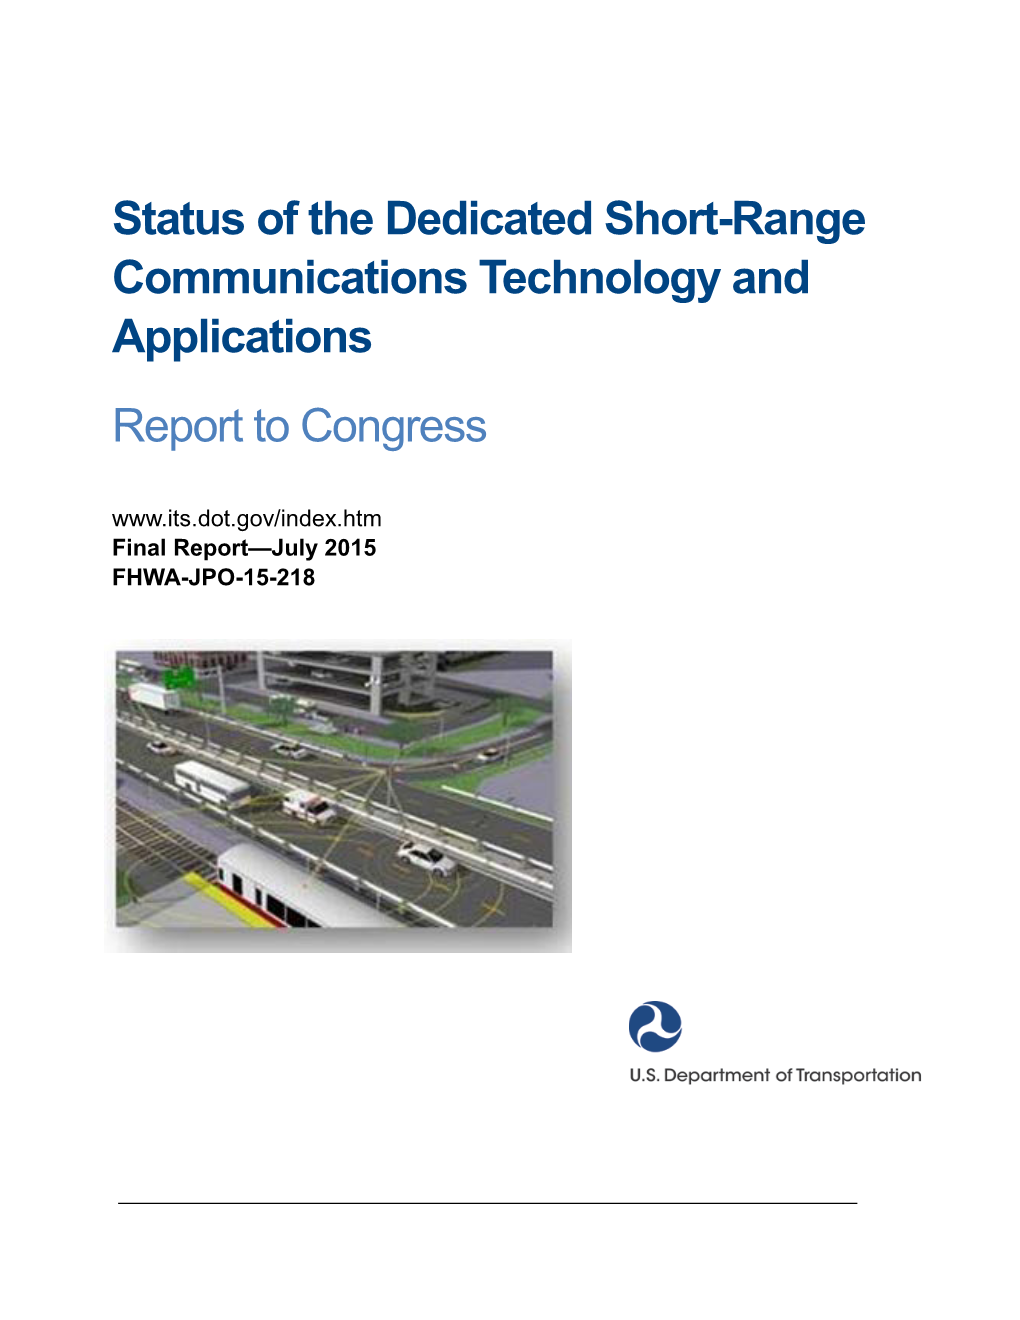 Status of the Dedicated Short-Range Communications Technology and Applications Report to Congress